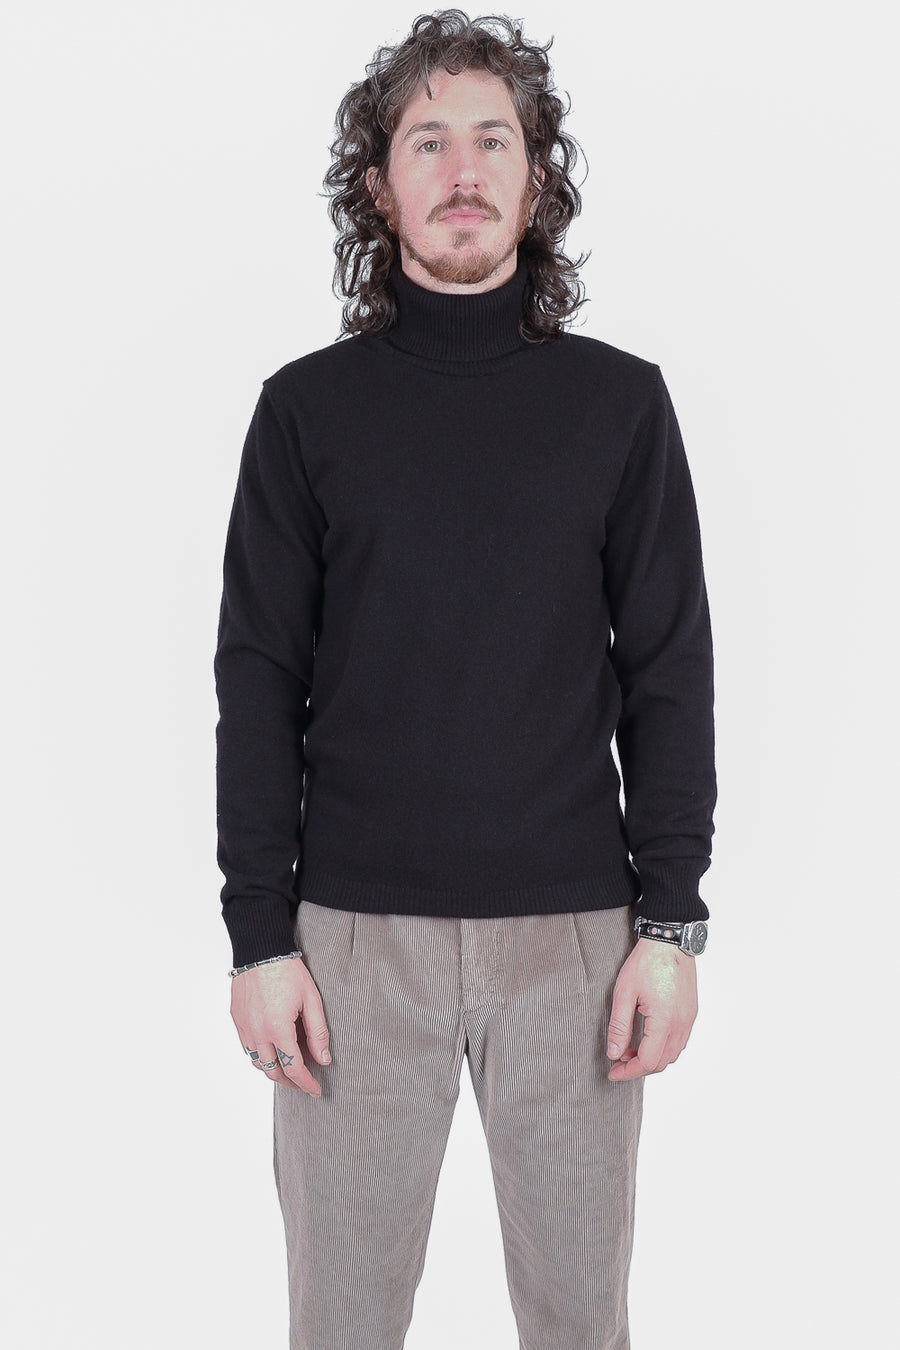 Buy the Daniele Fiesoli Italian Wool Turtle Neck Sweatshirt in Black at Intro. Spend £50 for free UK delivery. Official stockists. We ship worldwide.